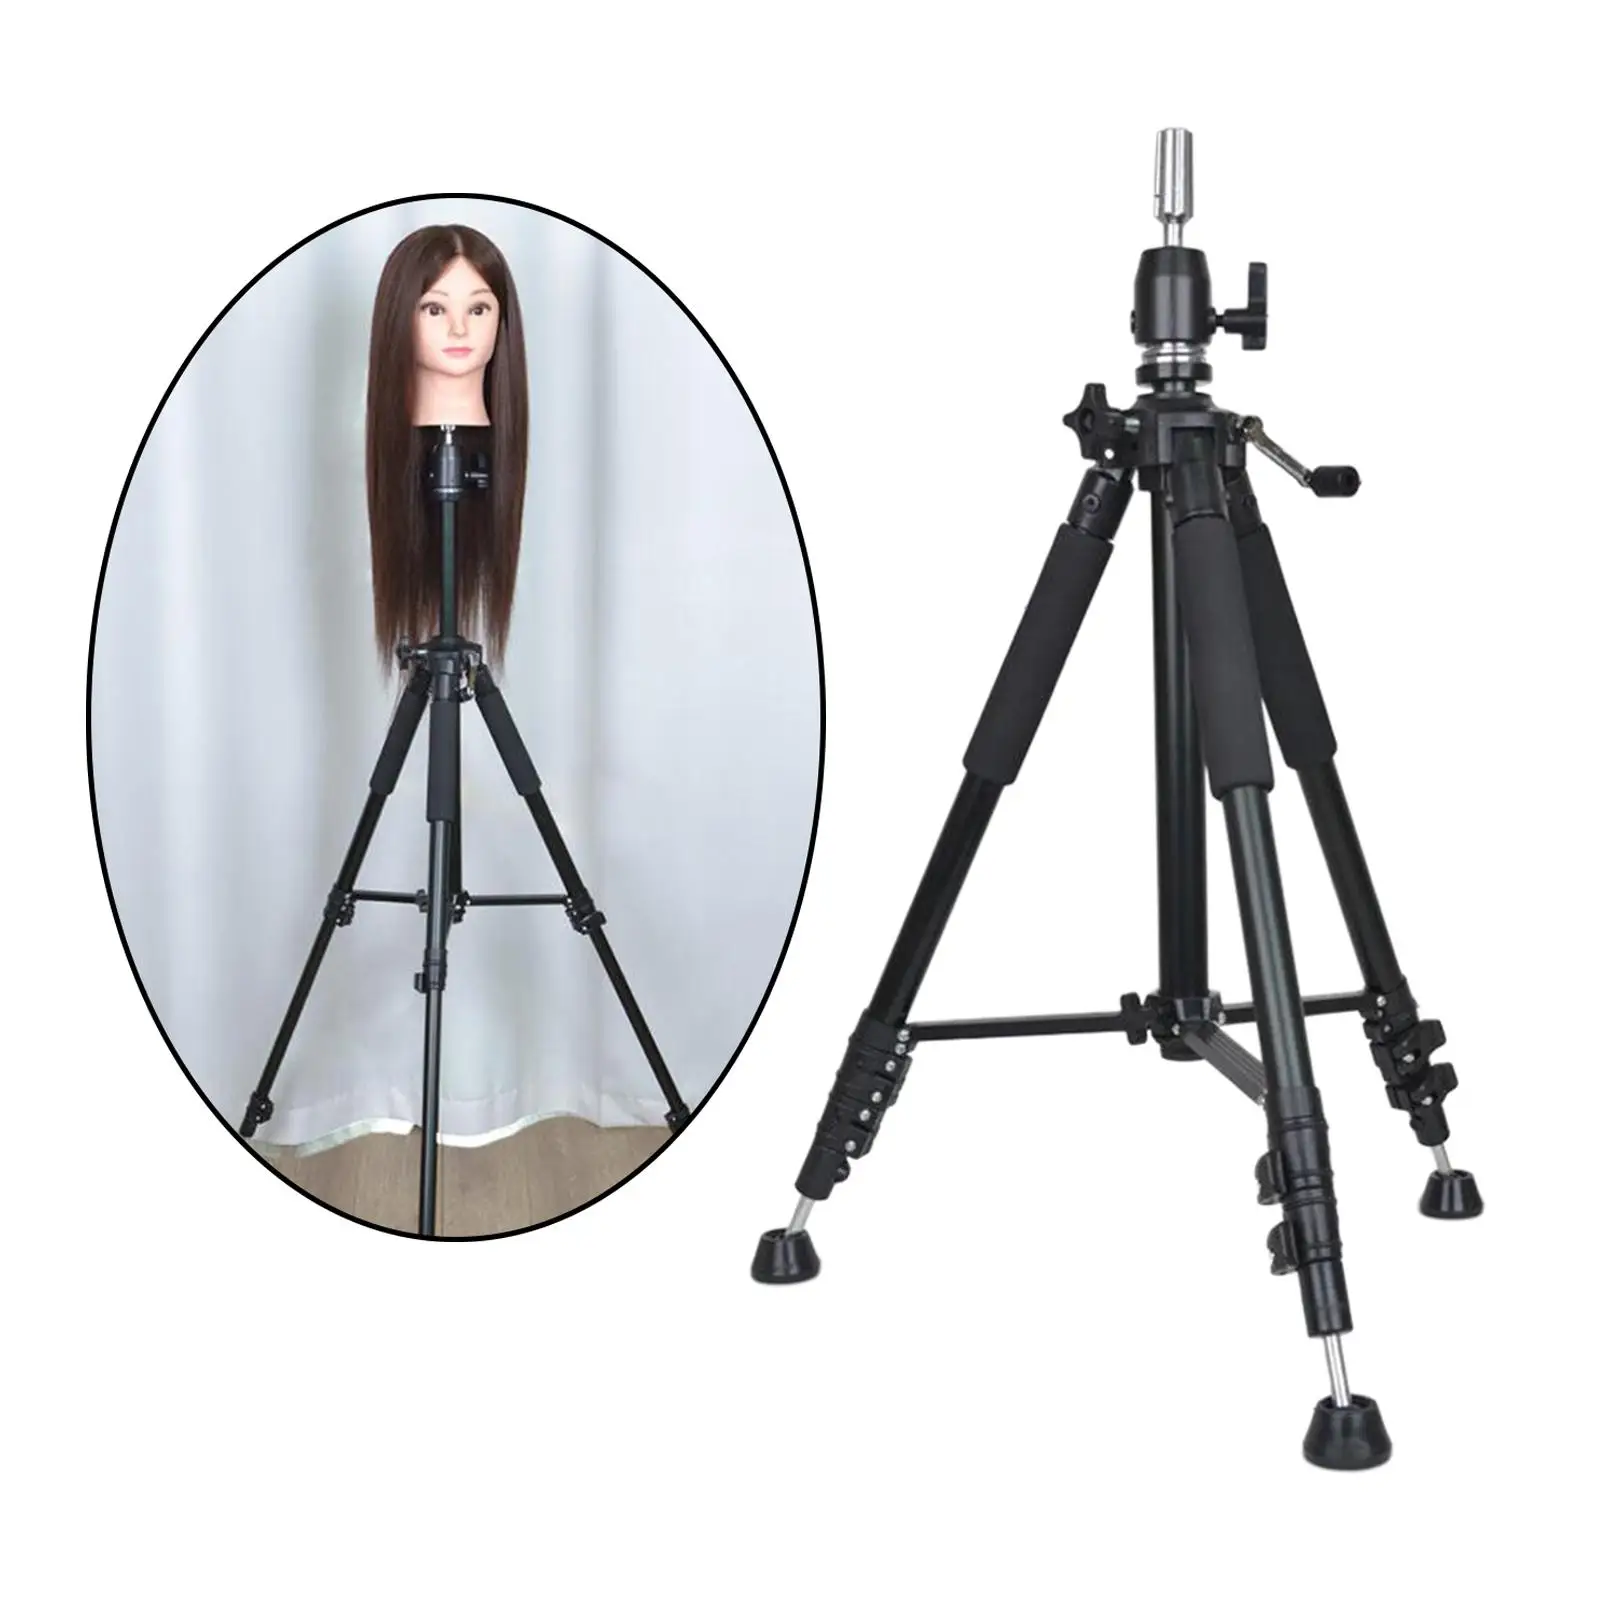 Wig Head Tripod Stand Mannequin Block Training Adjustable Height Styling Wig Holder Multifunction for Hairdressing Practice